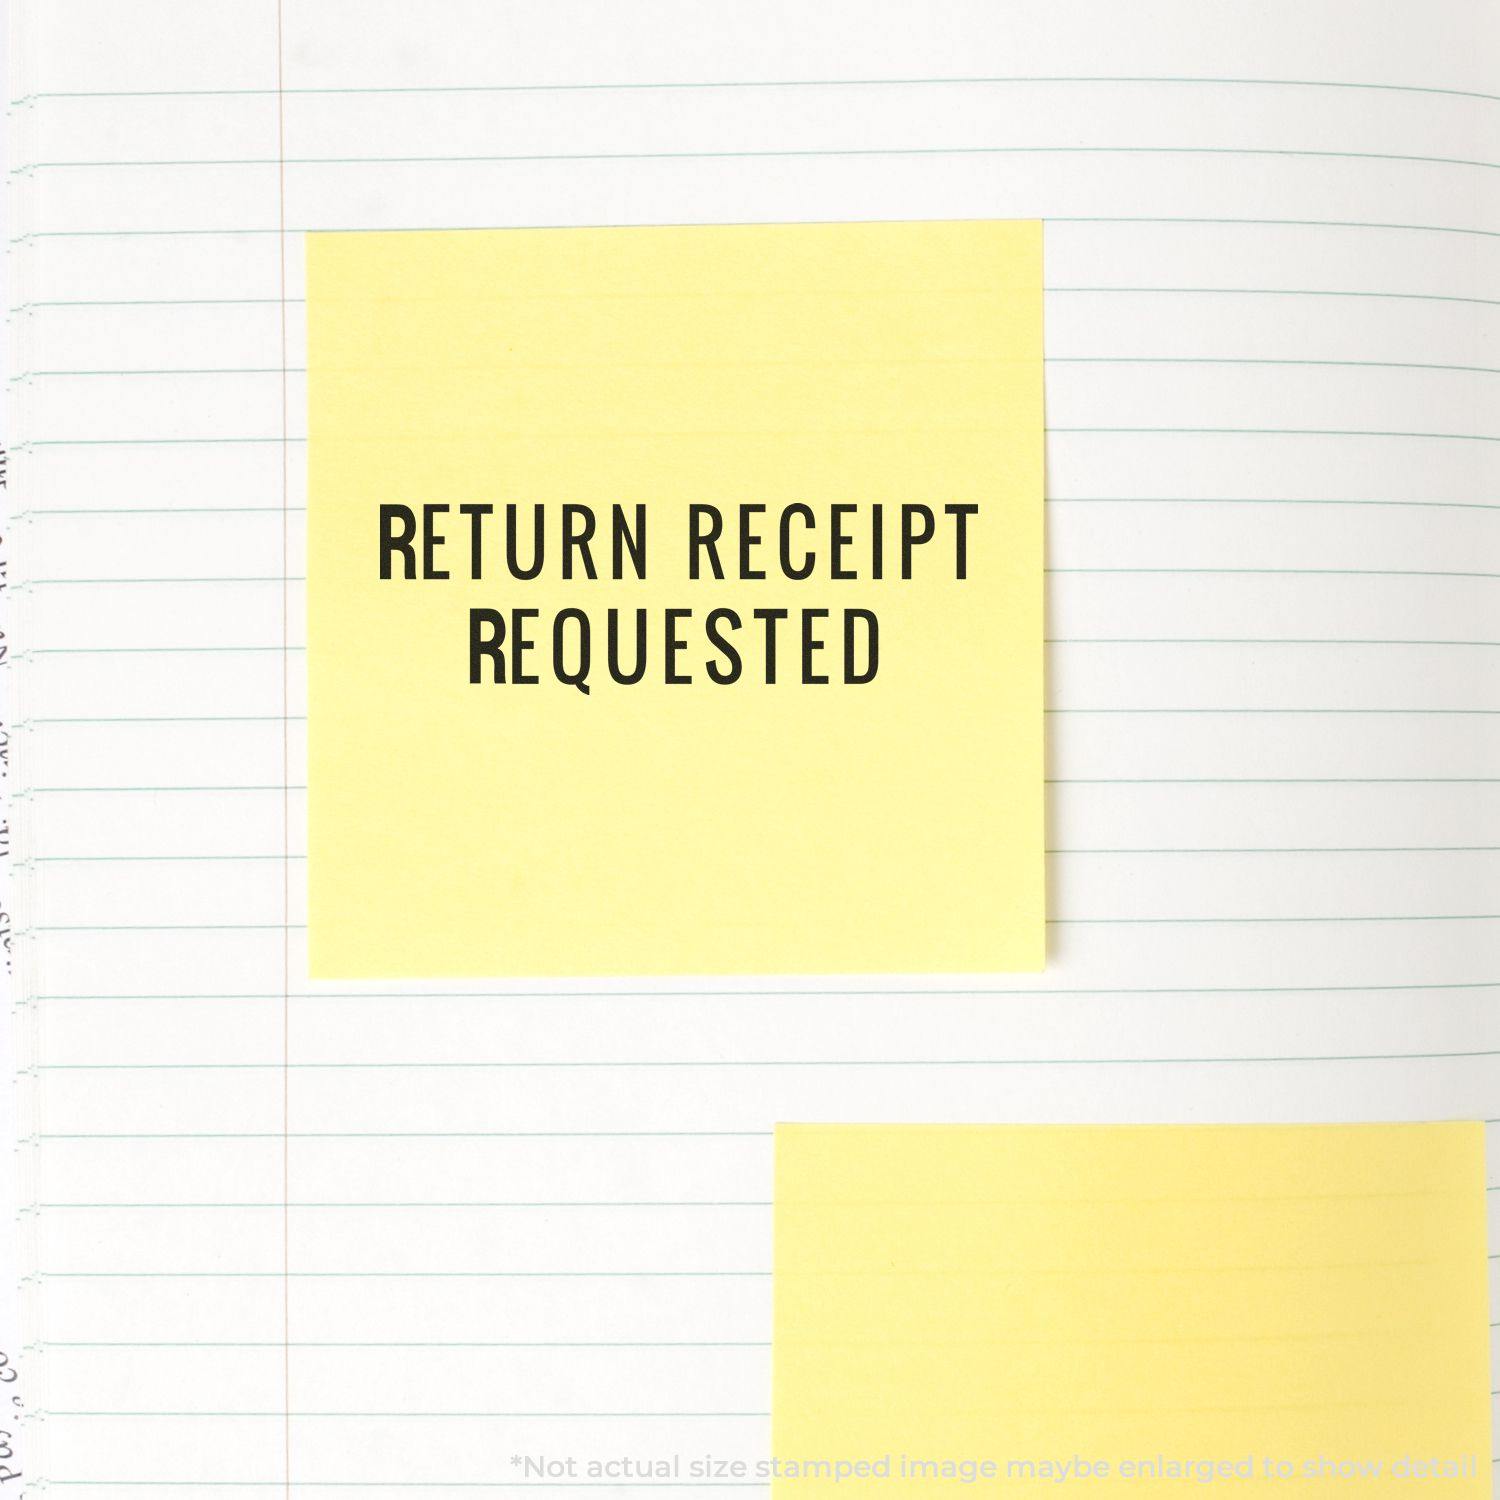 Slim Pre-Inked Narrow Font Return Receipt Requested Stamp In Use Photo